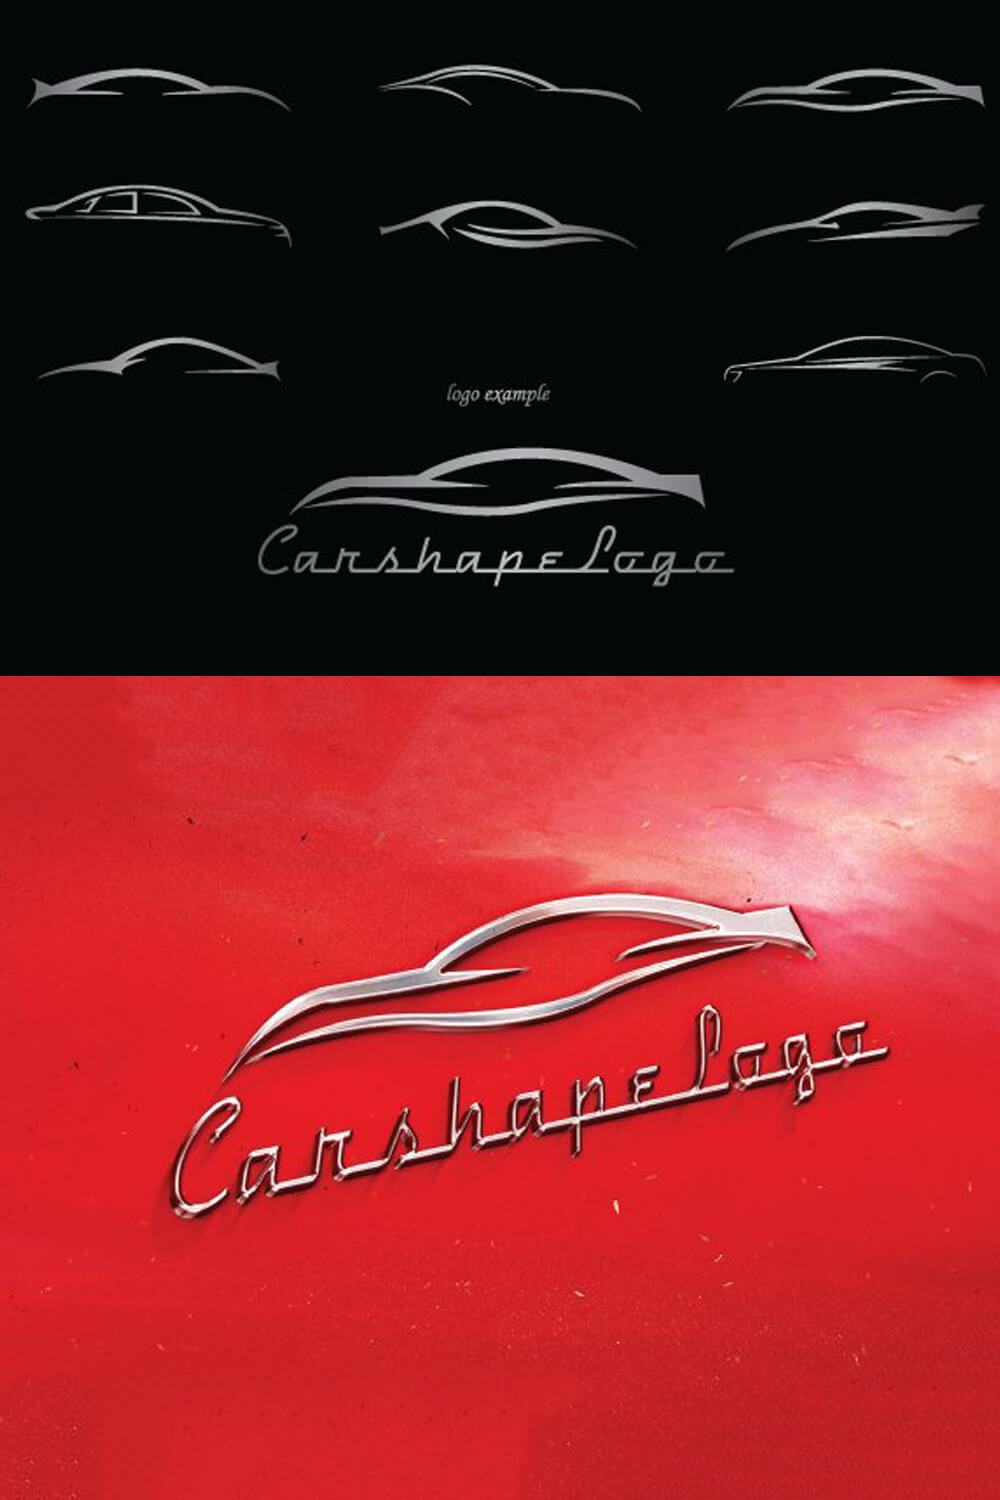 red automotive logos and names